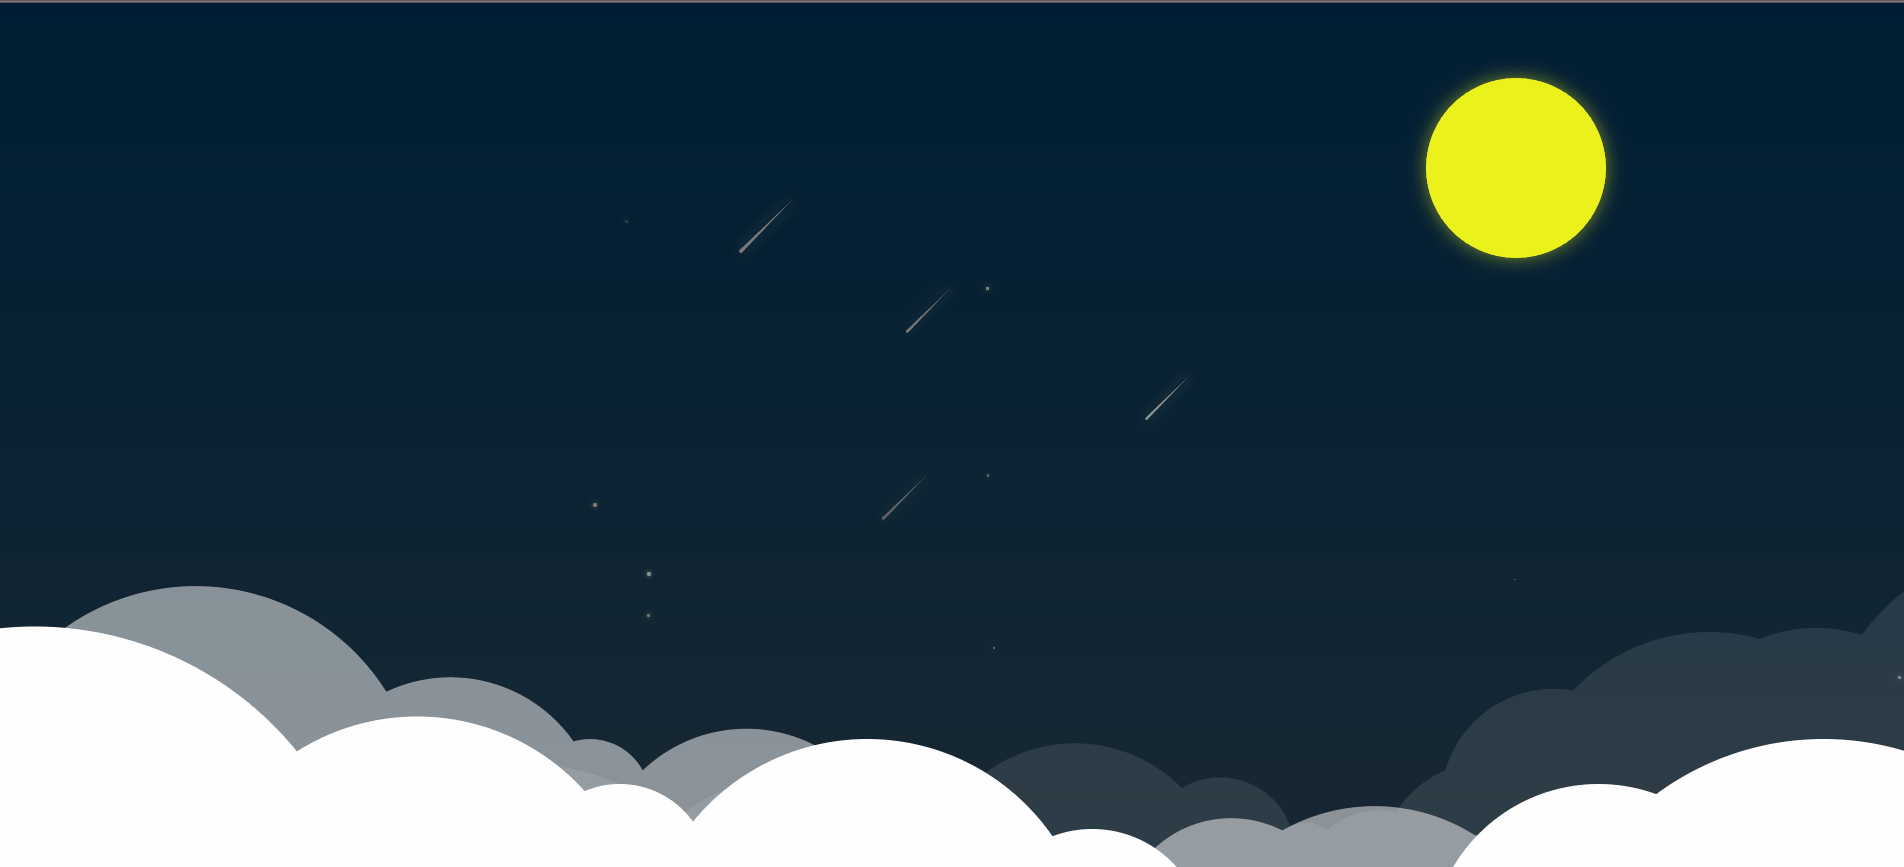 Getting web front-end to combat: CSS, JS achieve romantic meteor shower animation